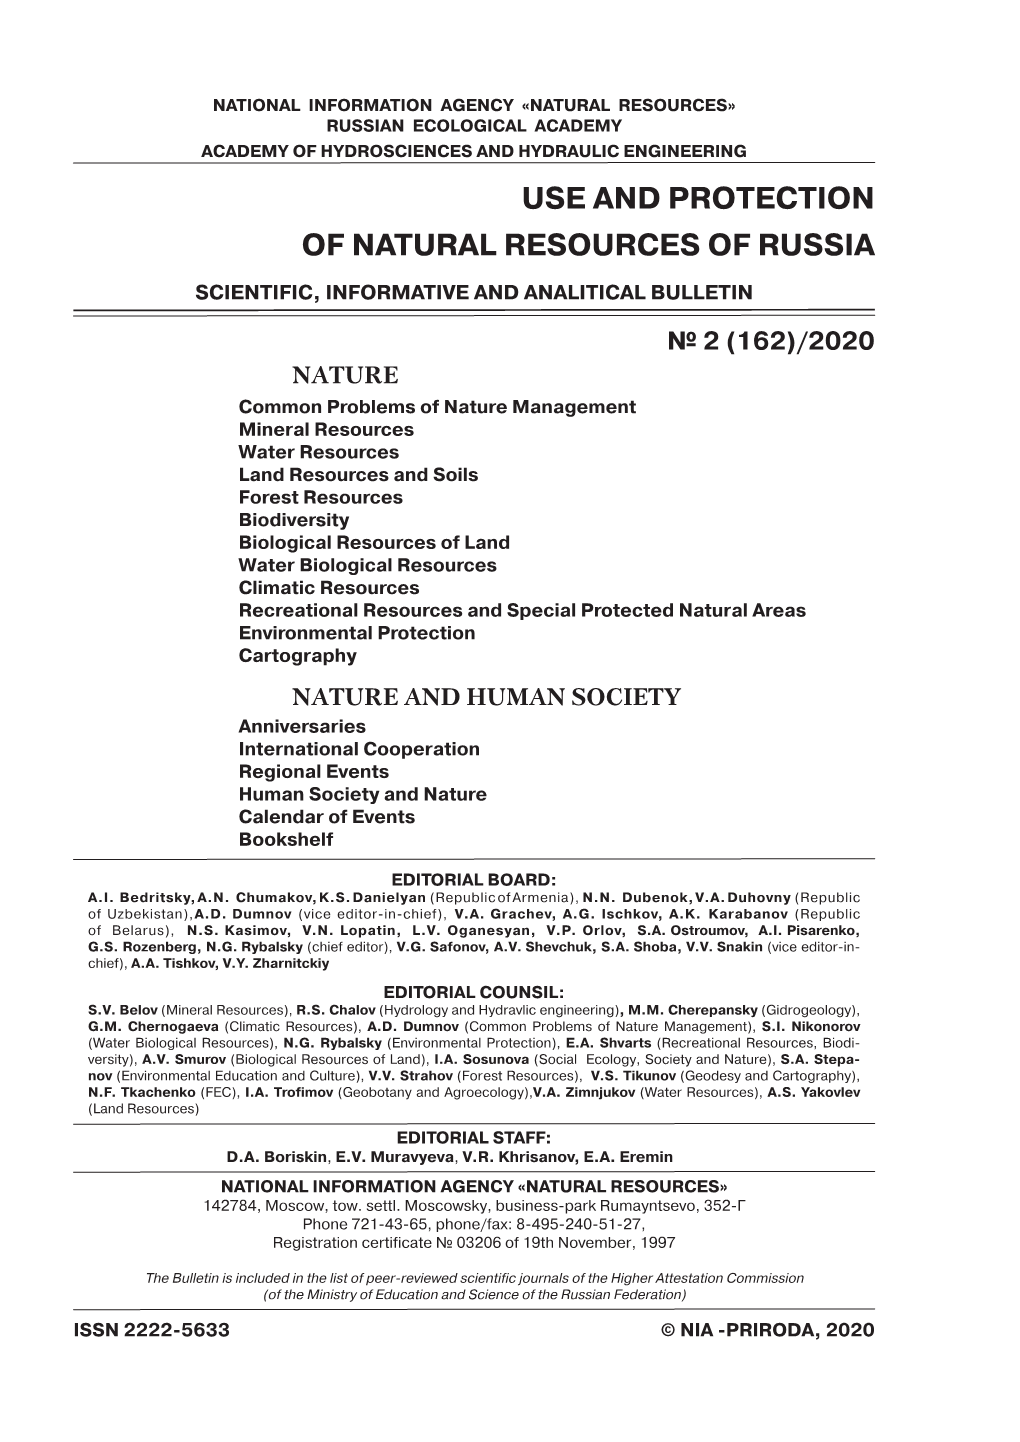 Use and Protection of Natural Resources of Russia